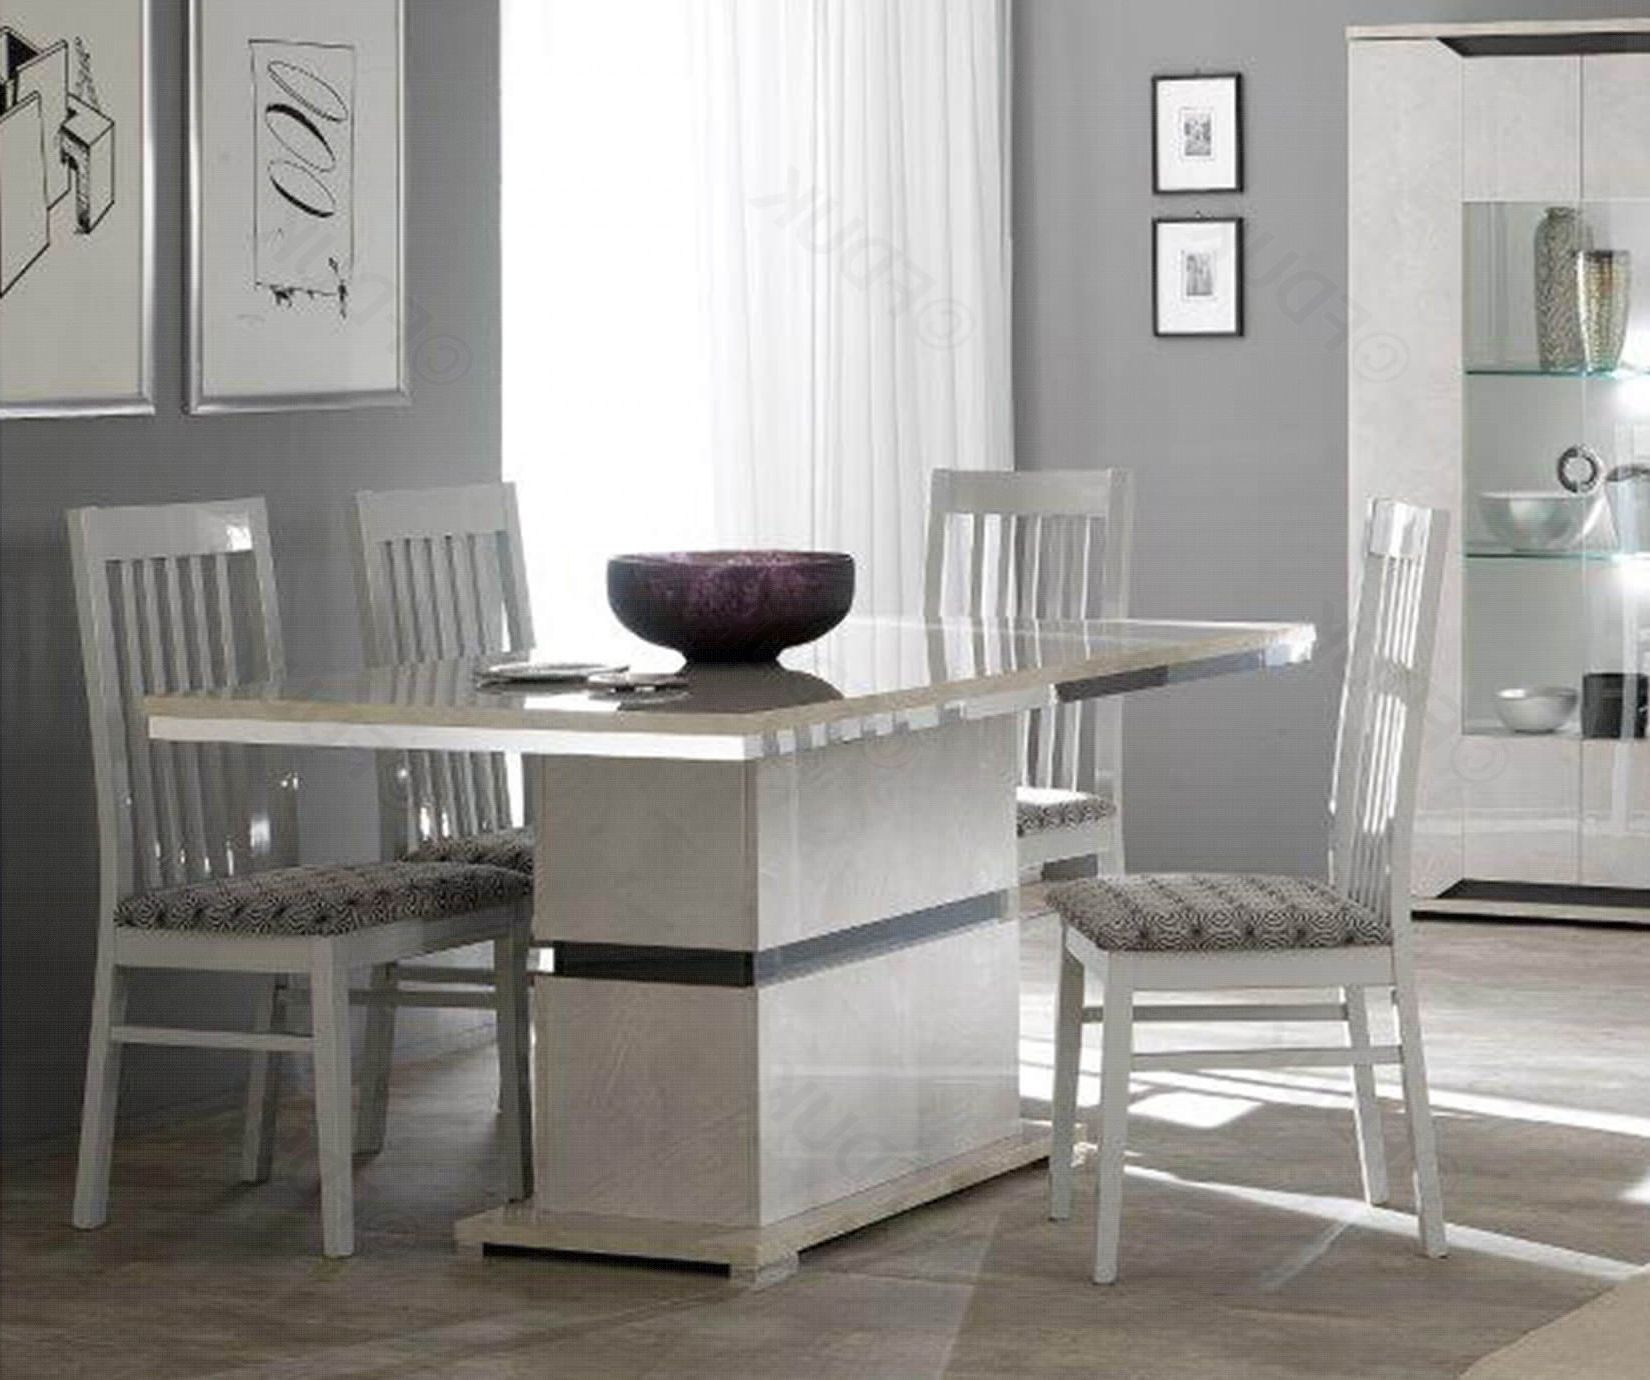 San Martino Mistral Rectangular Dining Table With 4 Wooden Dining Chairs Within 2019 Martino Dining Tables (View 3 of 25)